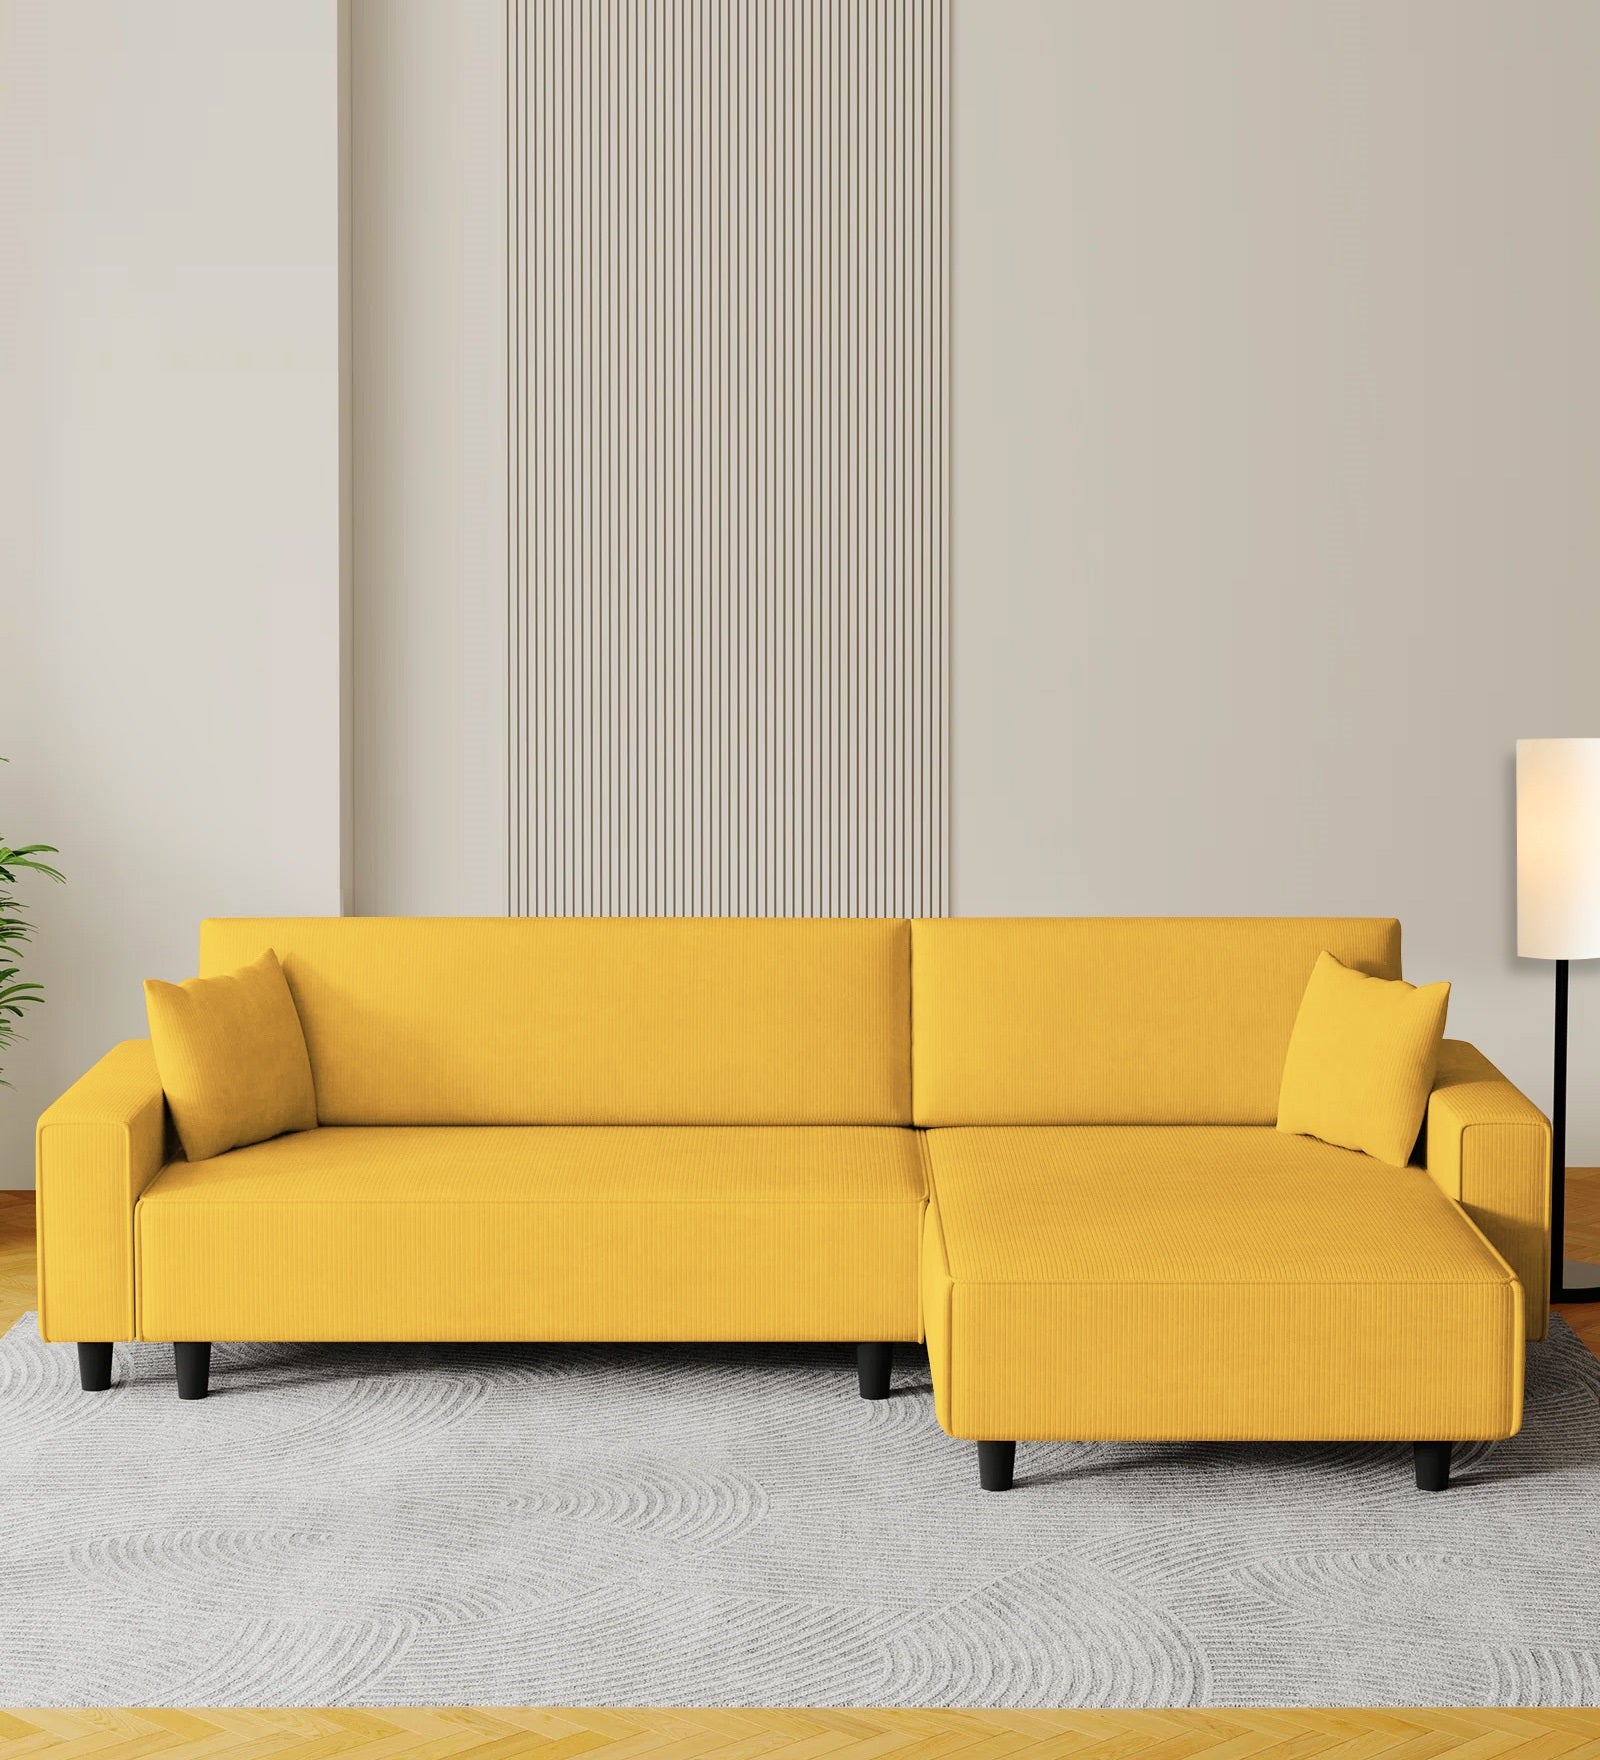 Peach Fabric LHS 6 Seater Sectional Sofa Cum Bed With Storage In Bold Yellow Colour